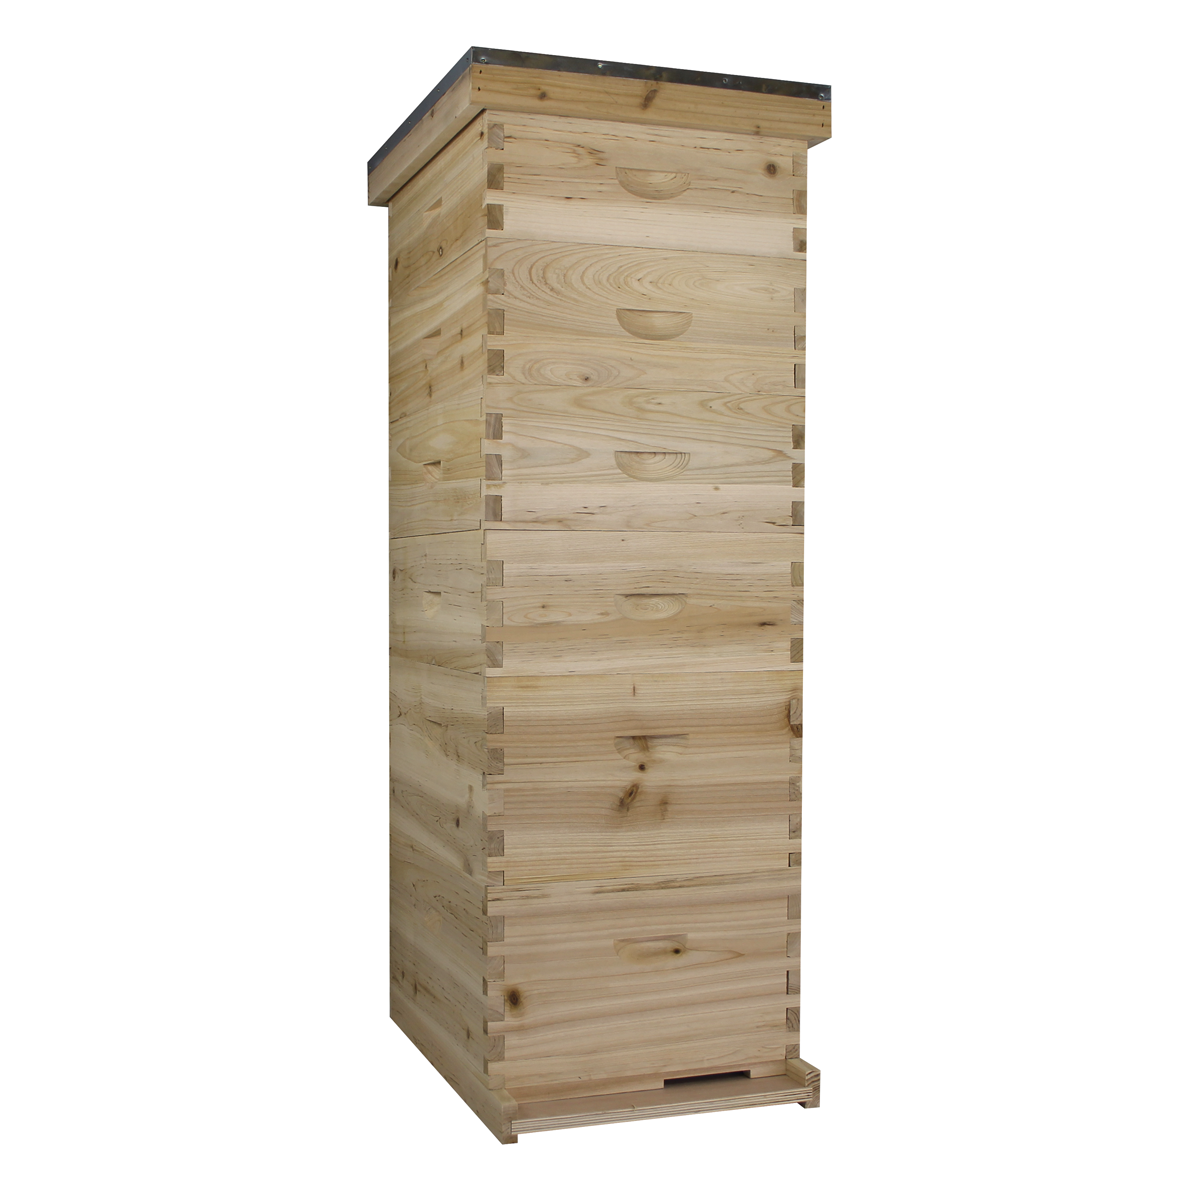 NuBee 10 Frame Beehive With 2 Deep Bee Boxes & 4 Medium Bee Boxes